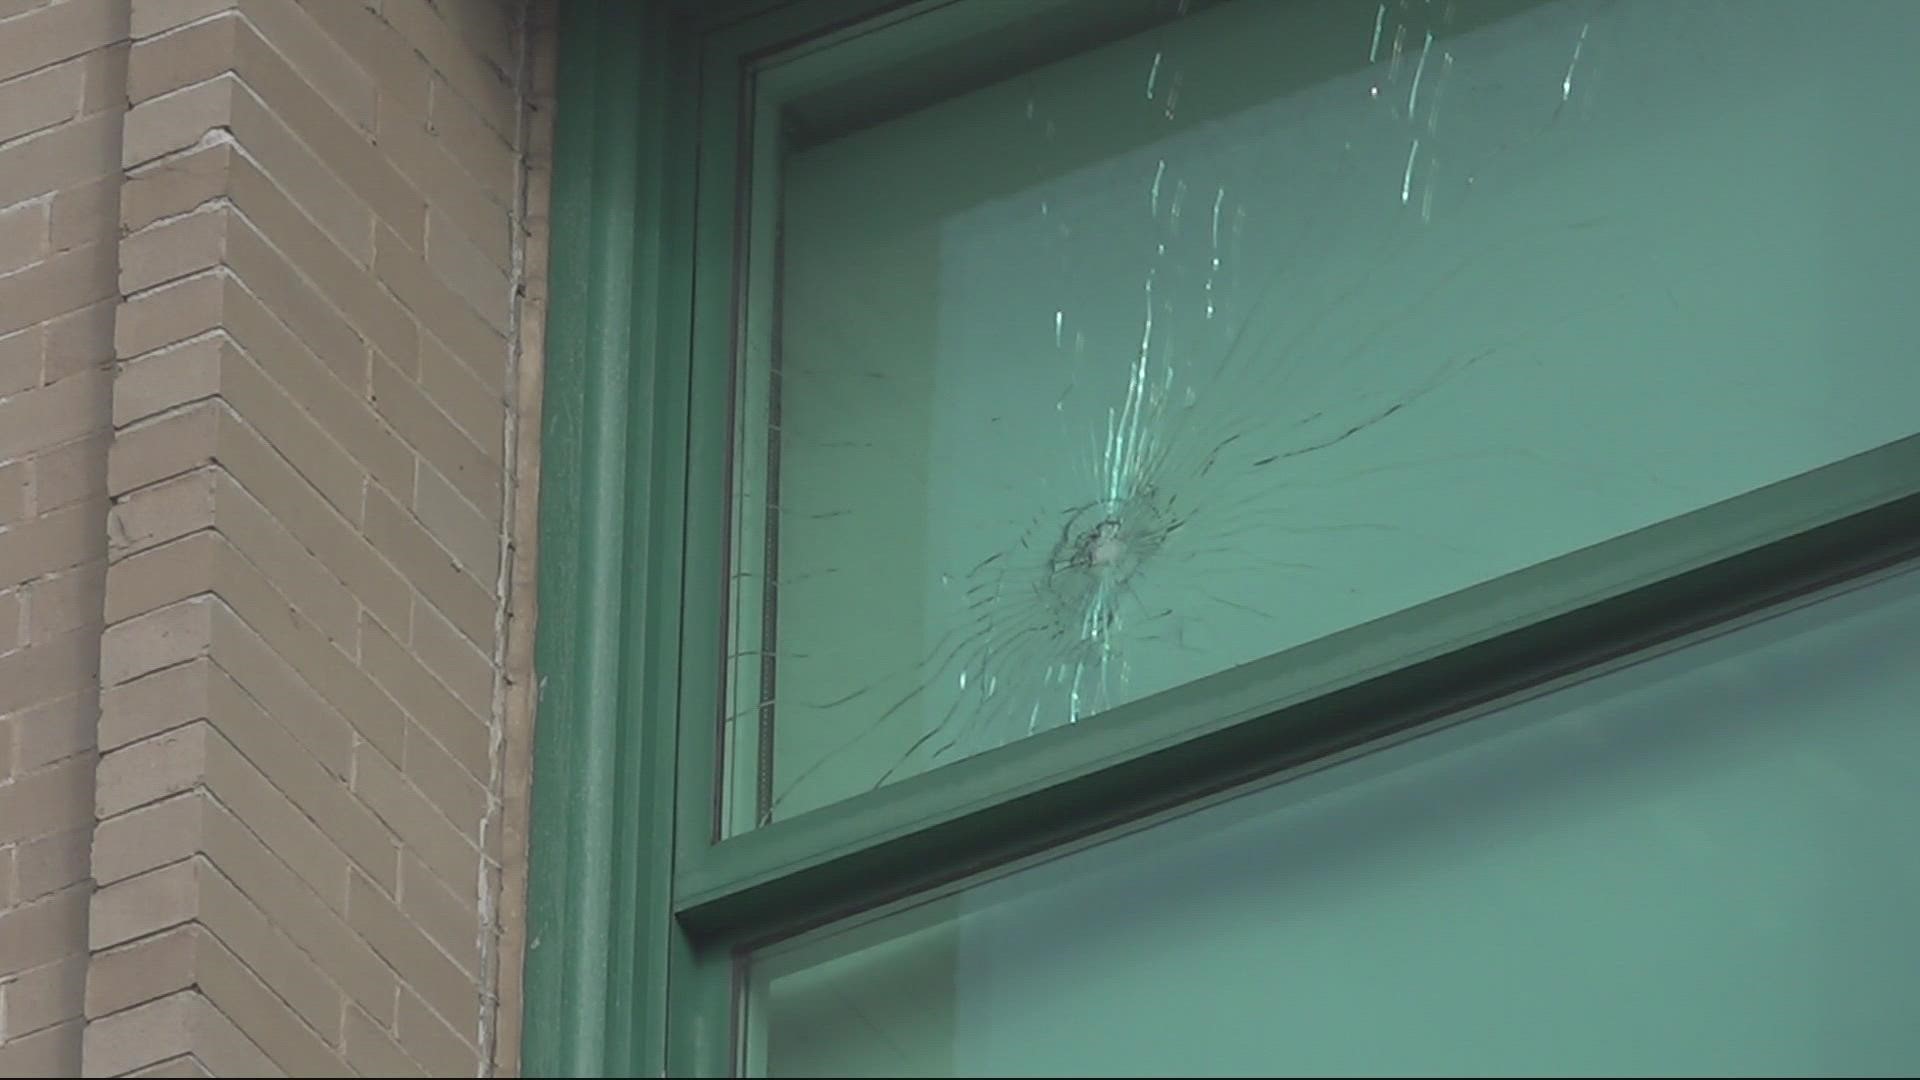 The windows of the City Hall building in Downtown Jacksonville were seen with bullet holes Tuesday.